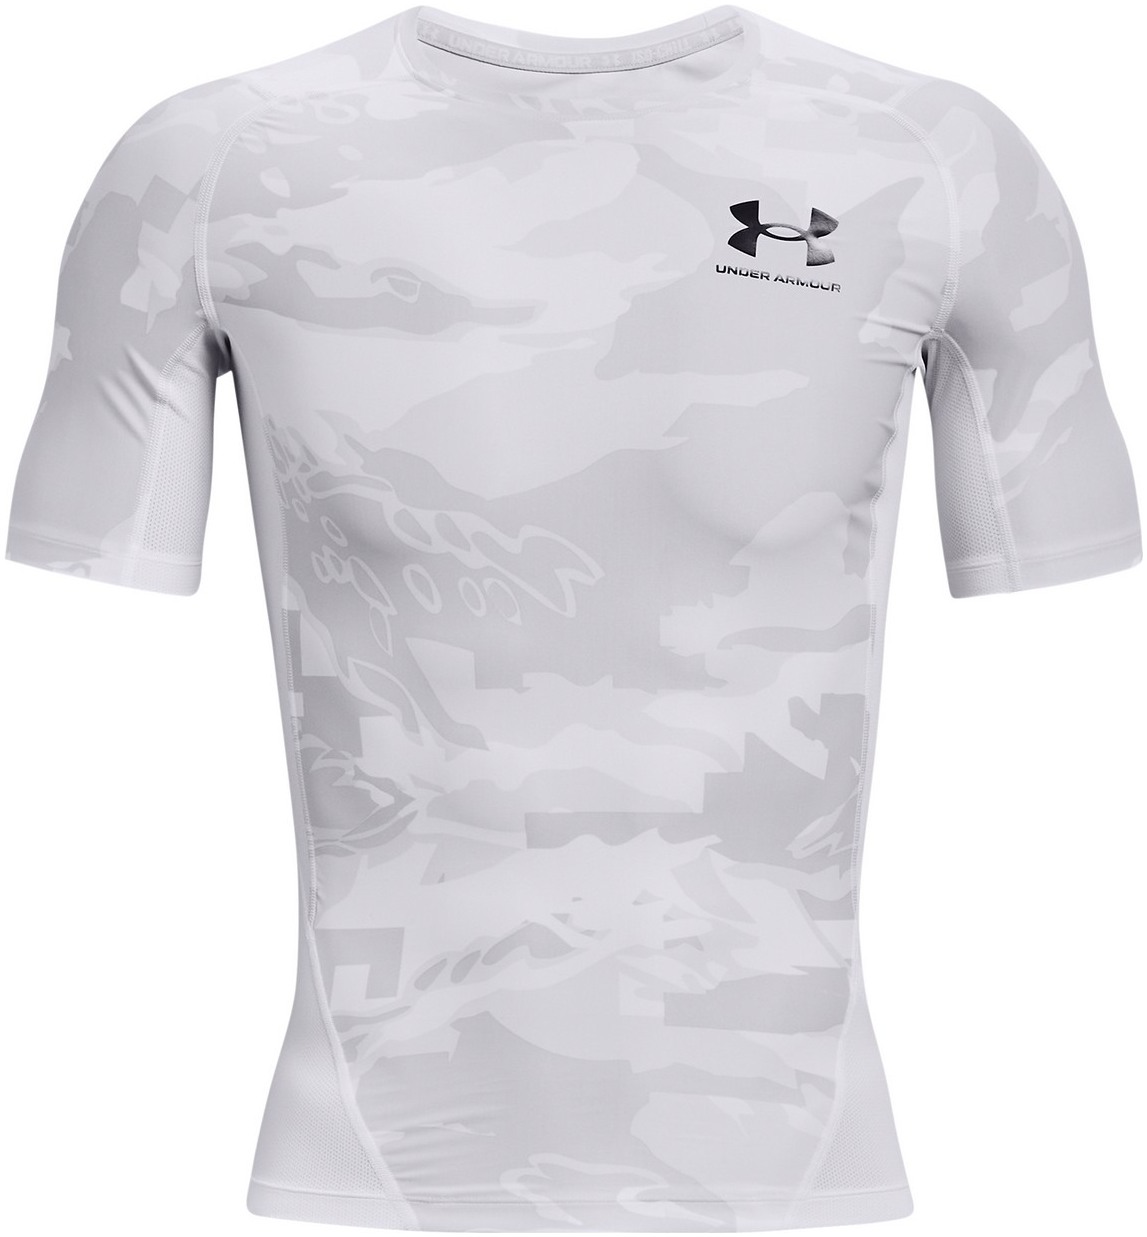 Under armour hg isochill comp print ss